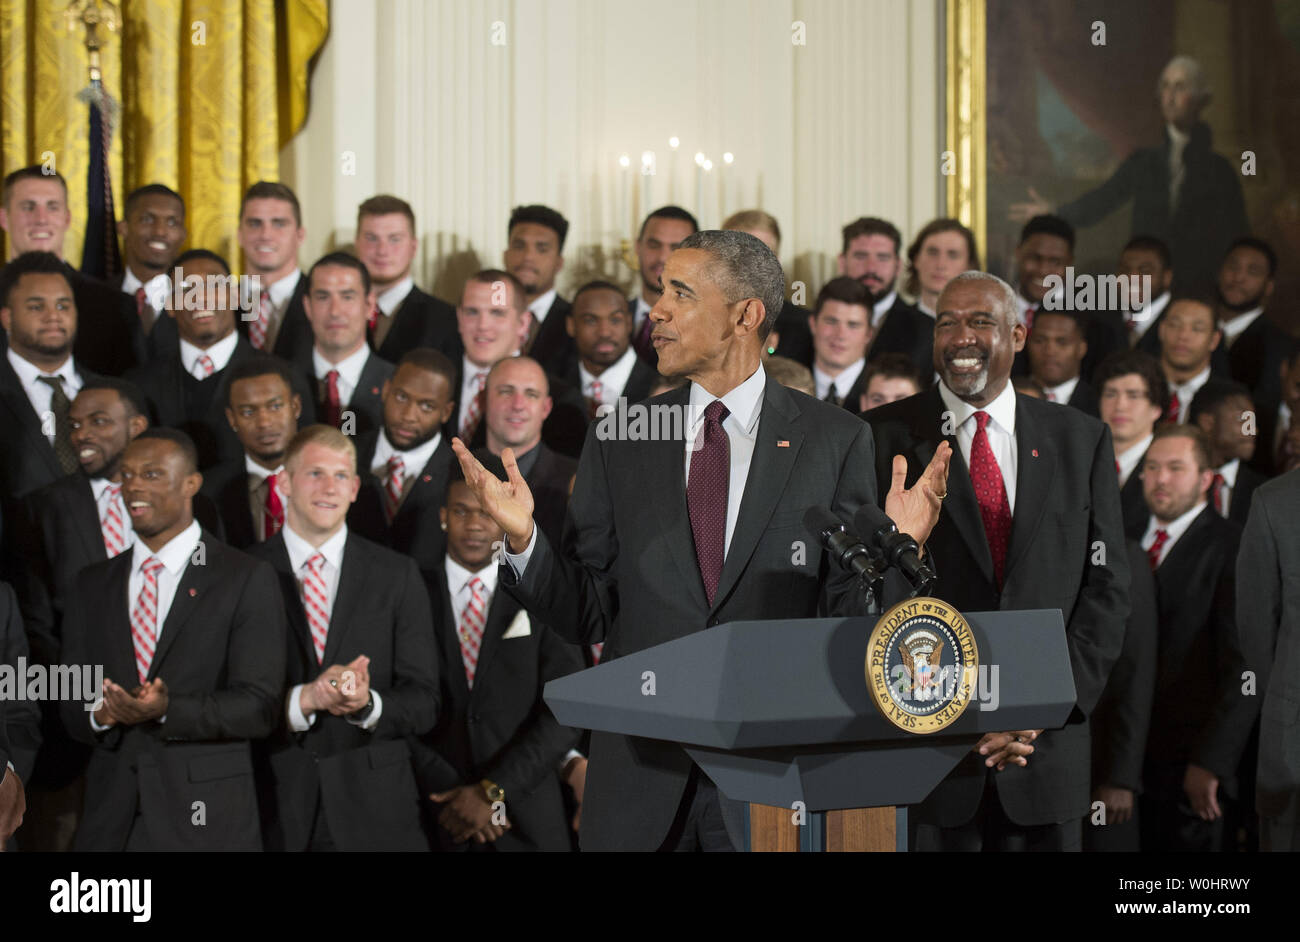 President Barack Obama delivers remarks as he honors the 2015 College Football Playoff National Champions Ohio State University Buckeyes in the East Room at the White House in Washington, D.C. on April 20, 2015.  Photo by Kevin Dietsch/UPI Stock Photo